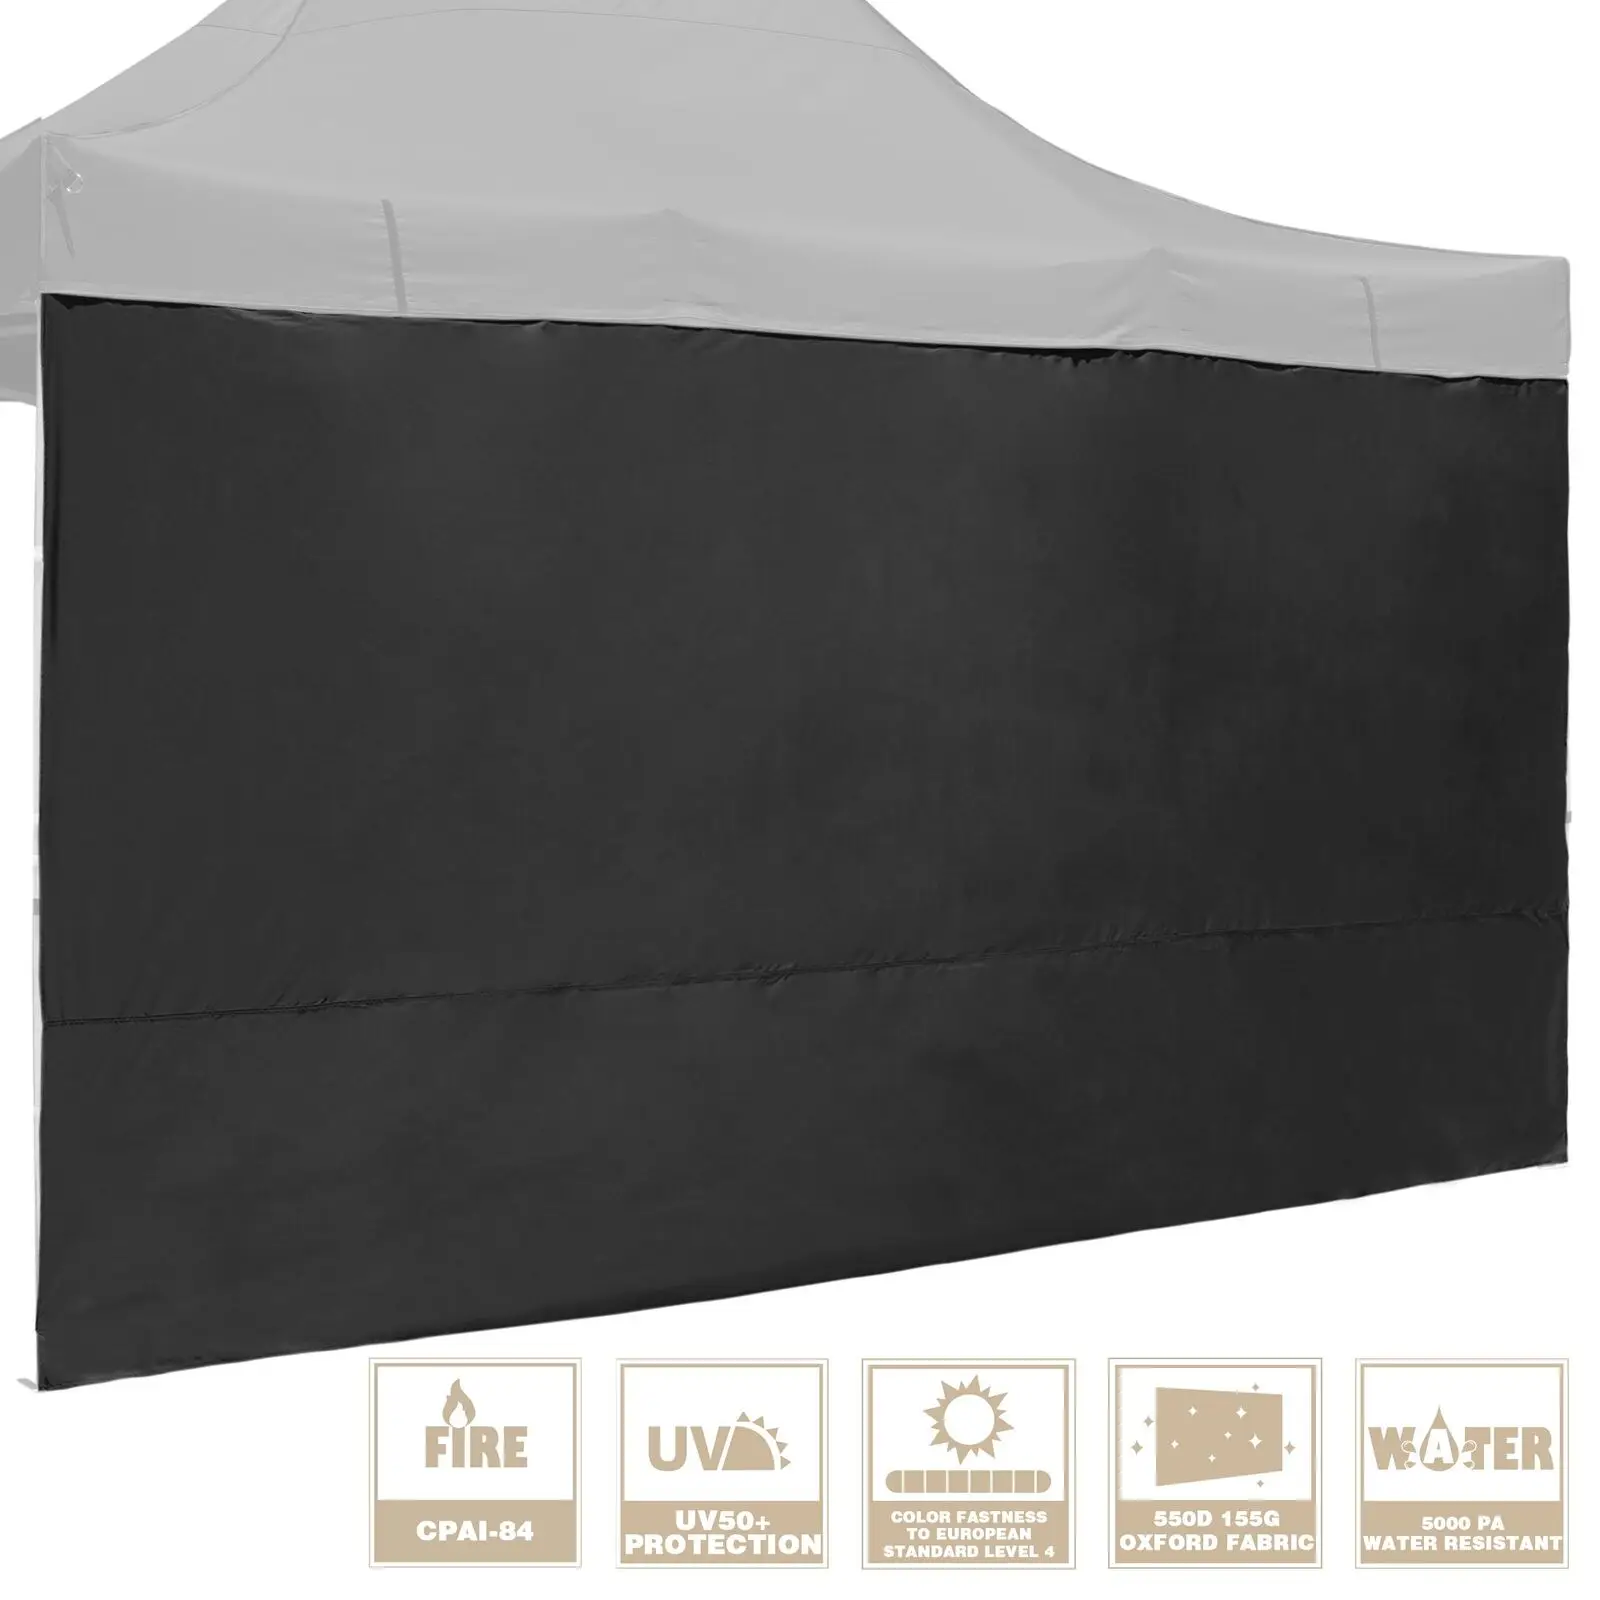 

15x7 Ft Oxford Fabric Canopy UV50+ Protection Sidewall Panel Black